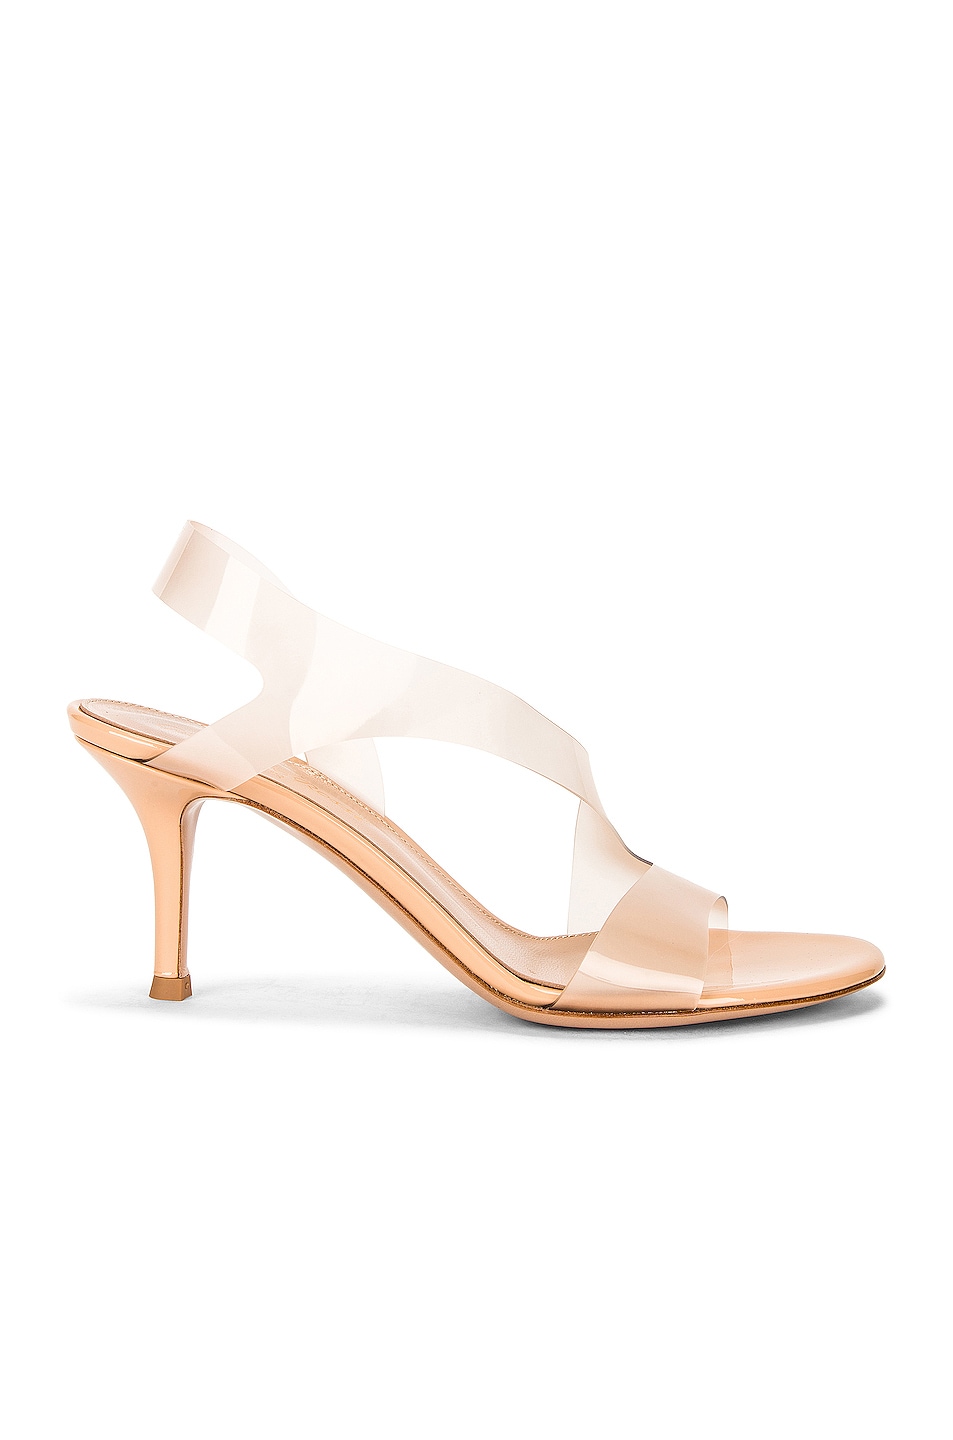 Image 1 of Gianvito Rossi Metropolis Leather & Transparent Heels in Nude & Nude